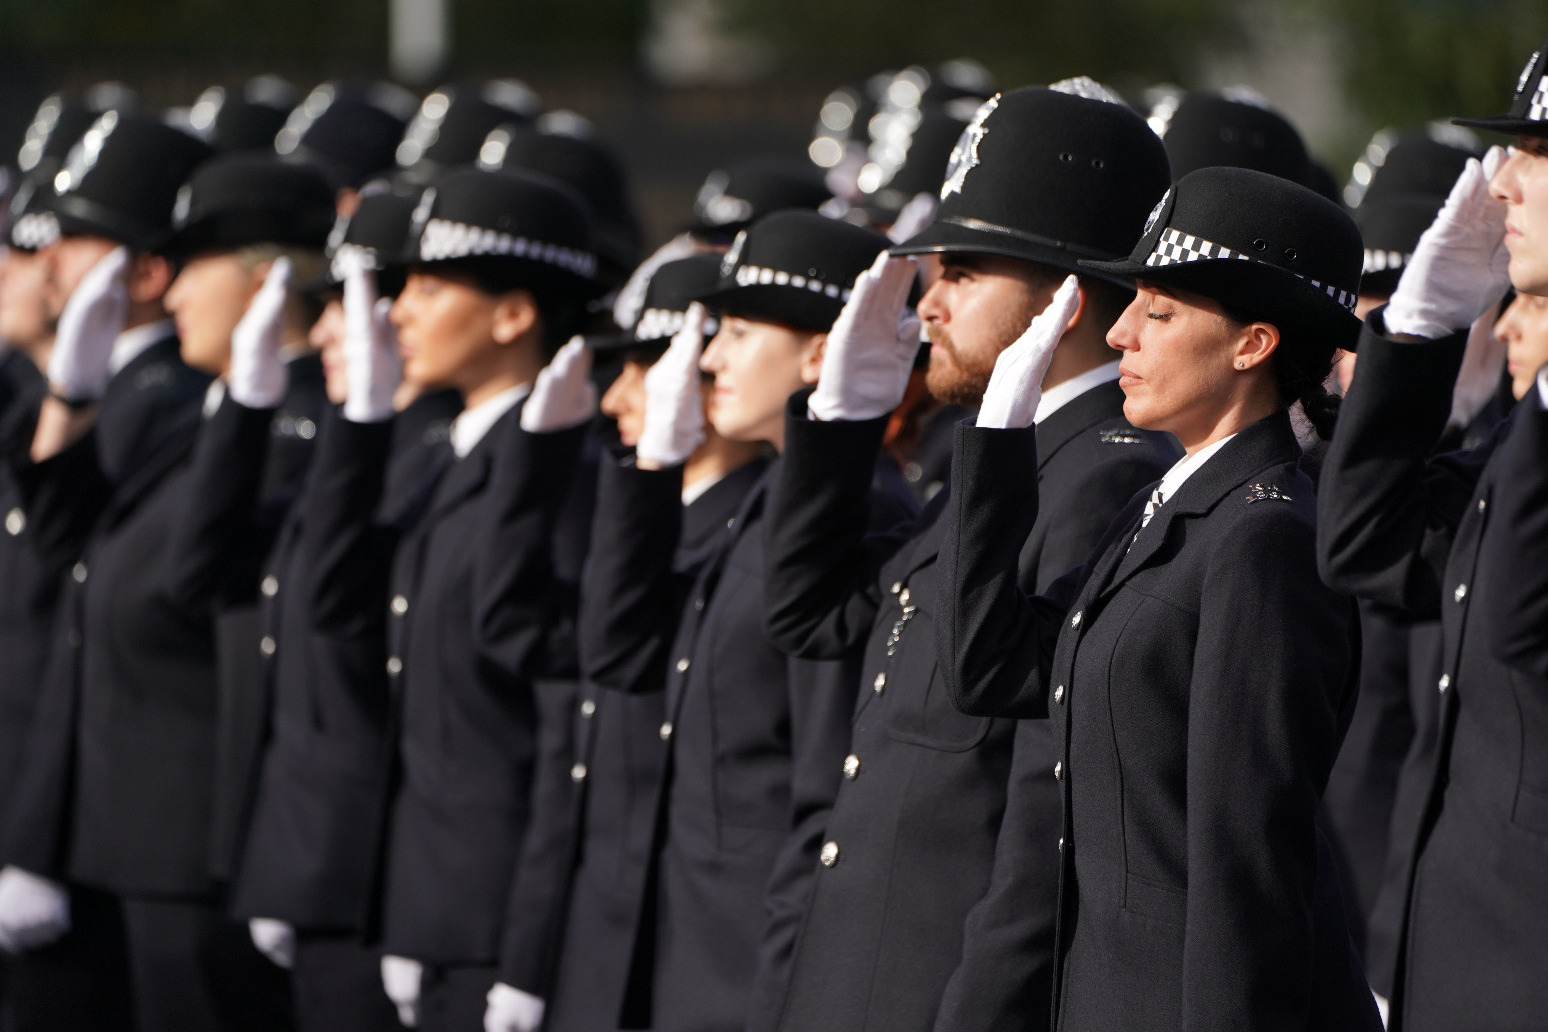 Police federation demands minimum 17% pay increase for officers 